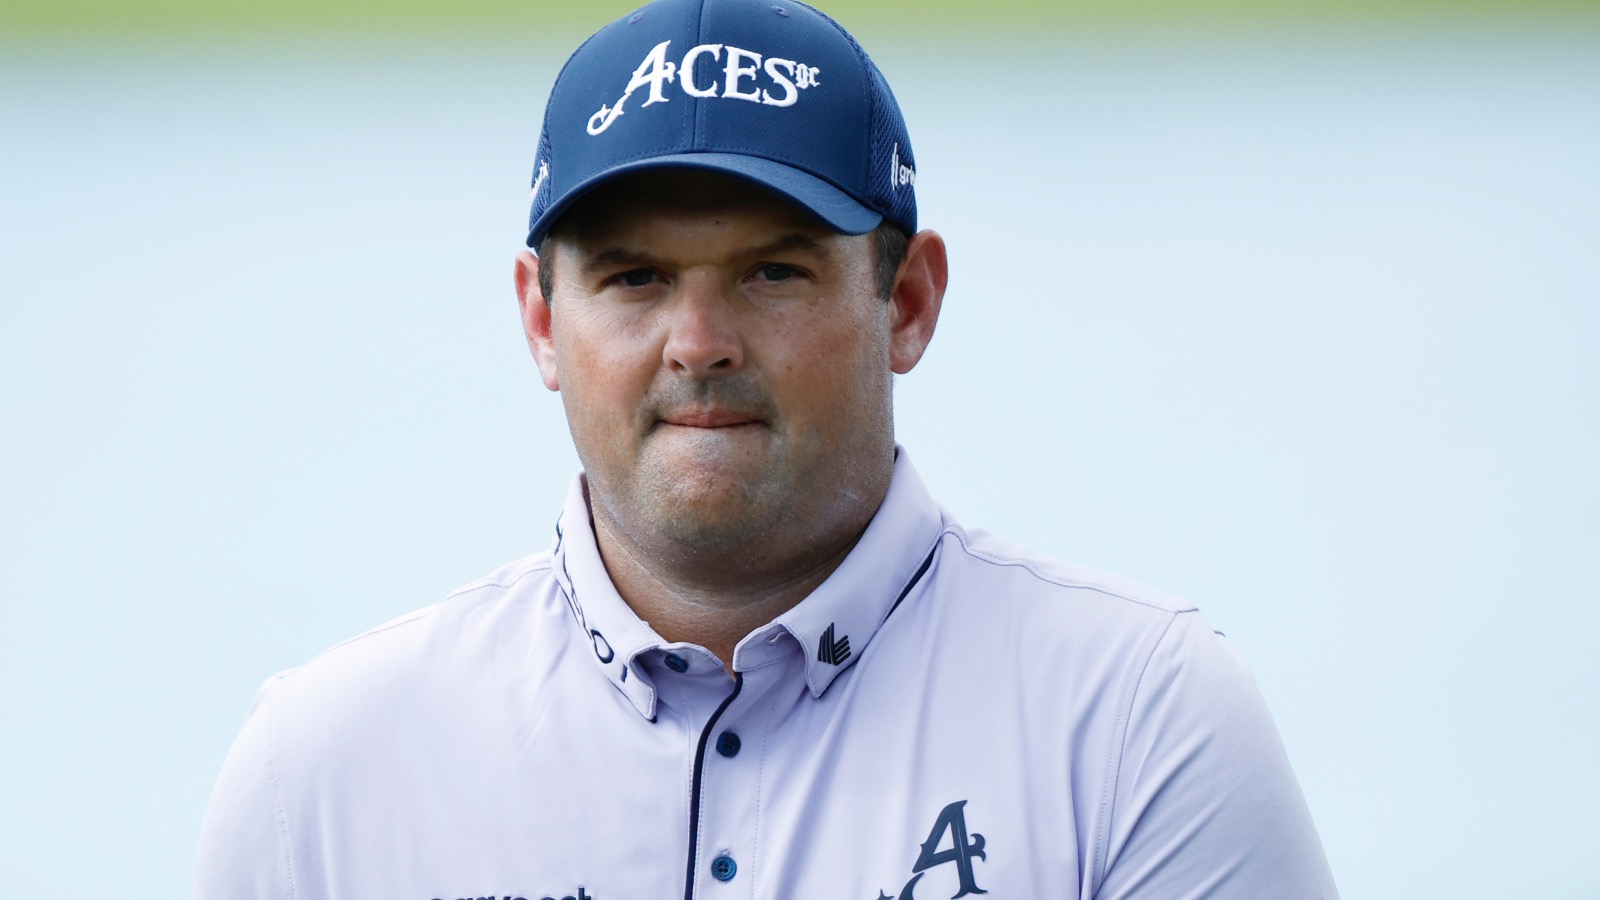 Patrick Reed Discusses 'Teaching Kids About Morals' As Motivation